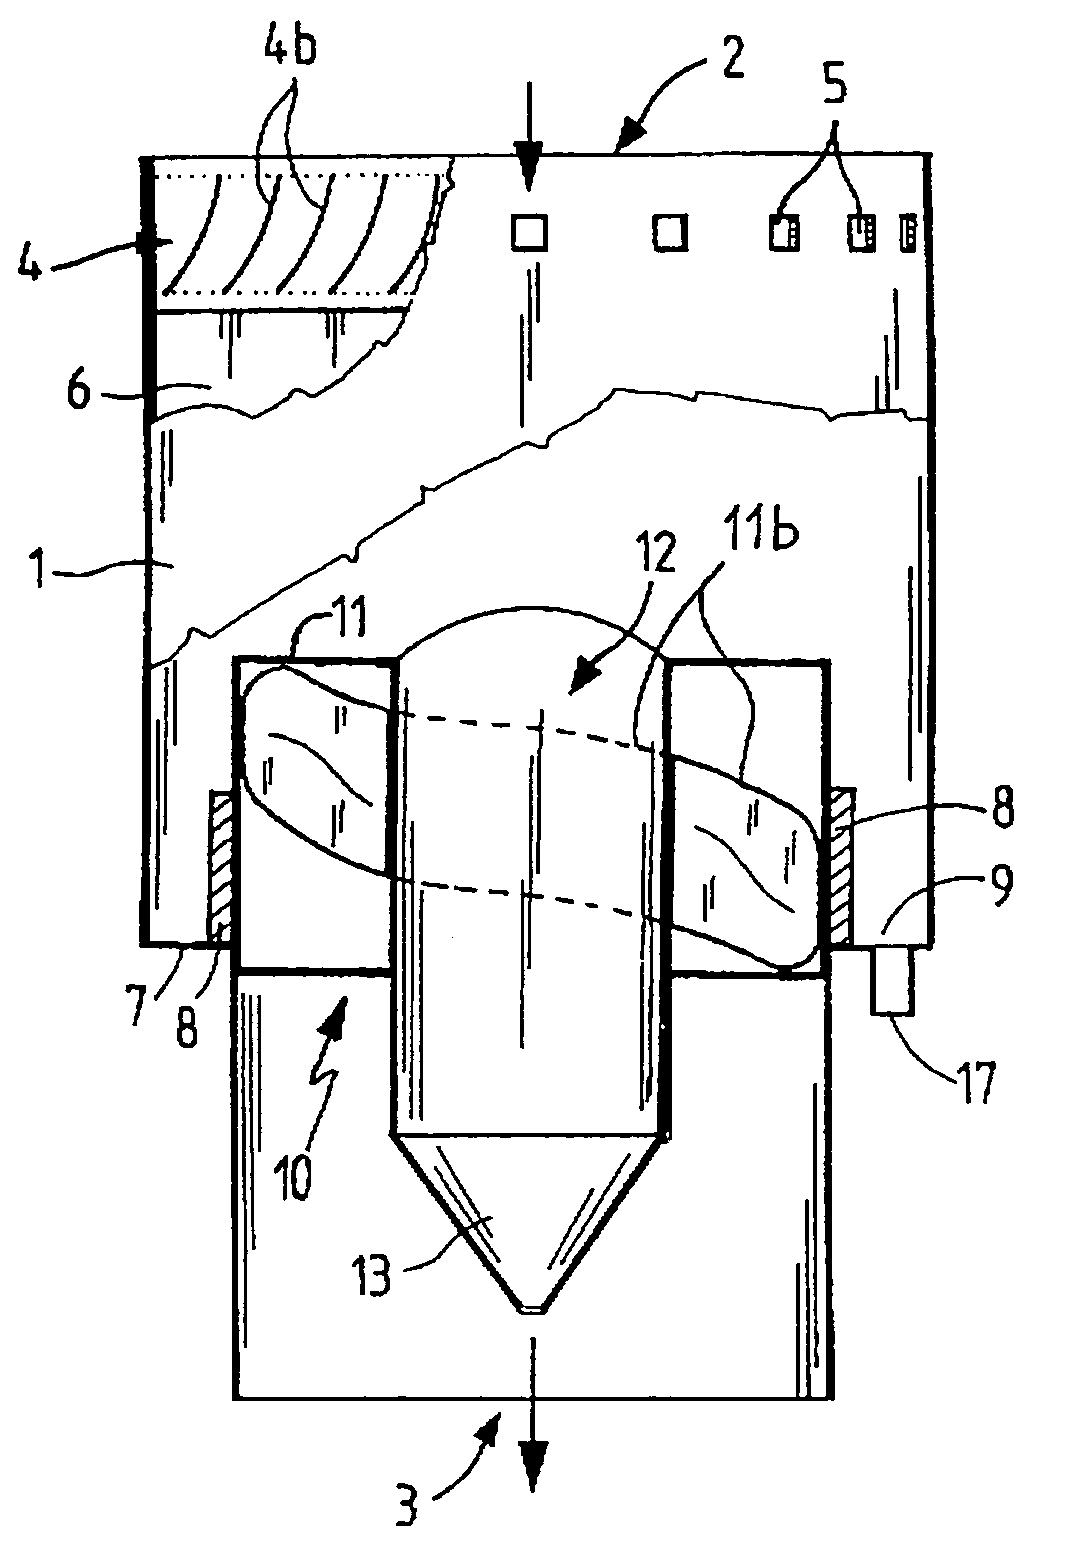 Apparatus for separating particles from a flowing medium